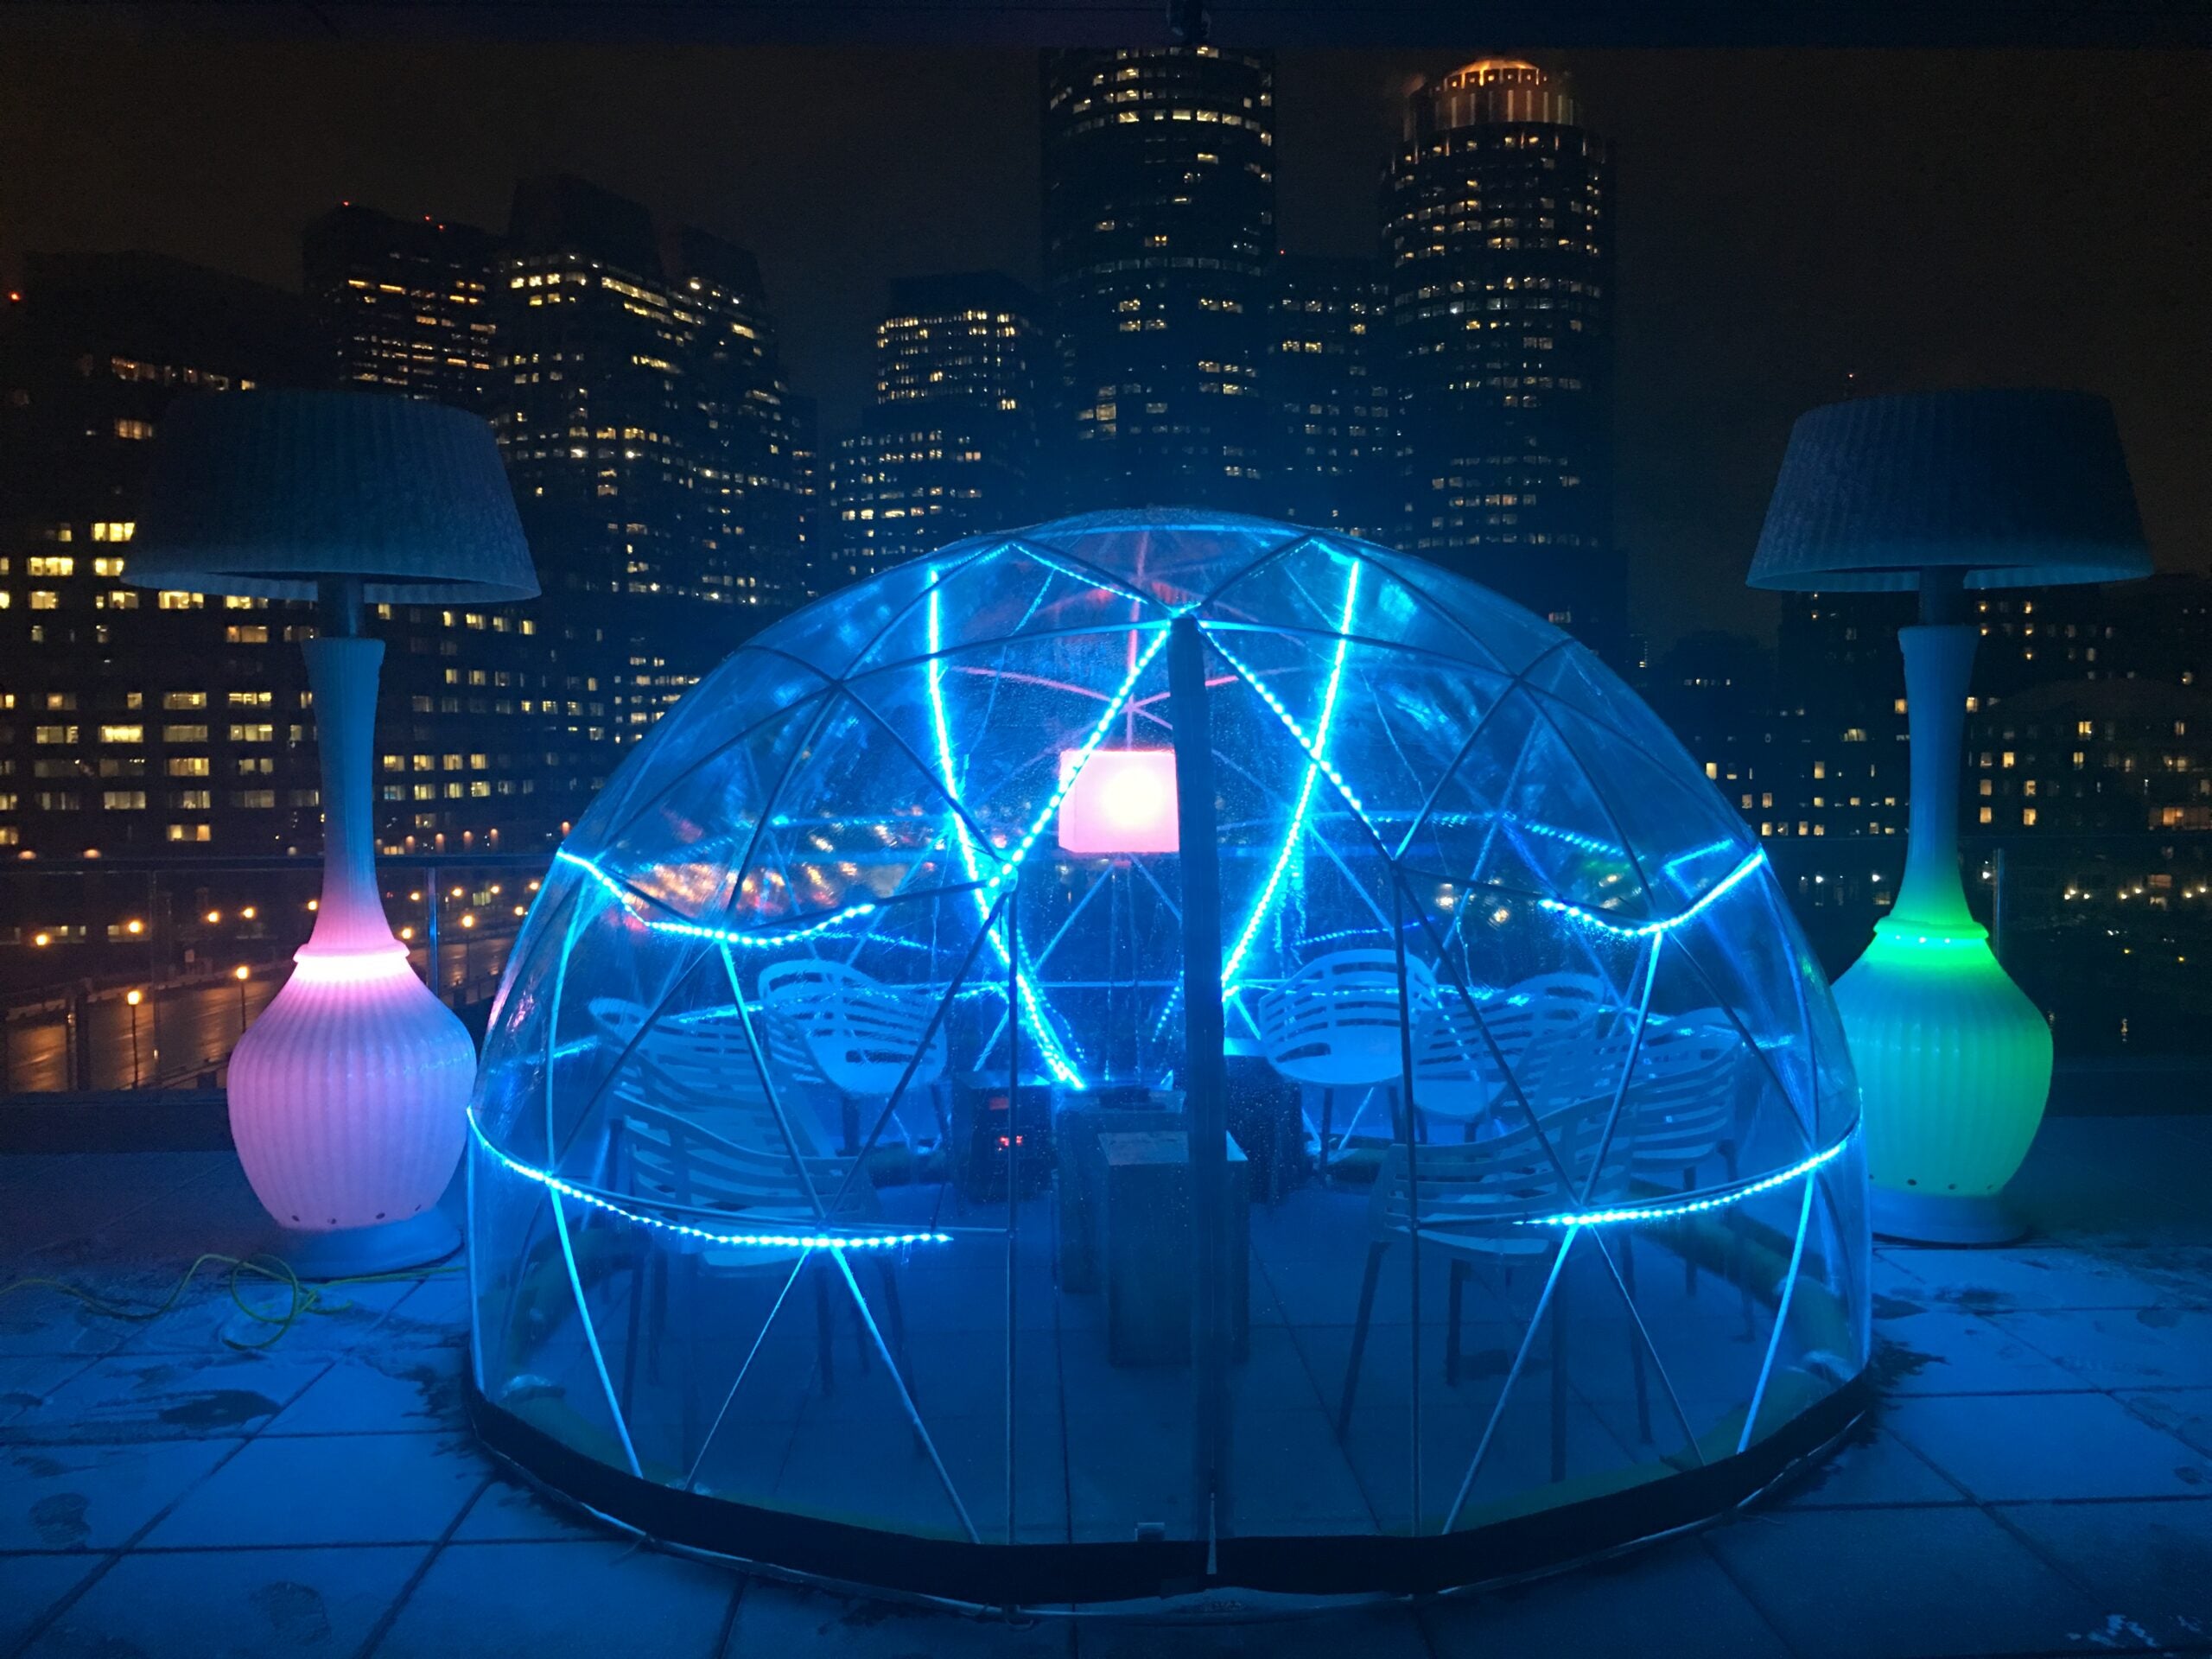 Sip cocktails inside an 'igloo' at this Seaport rooftop bar